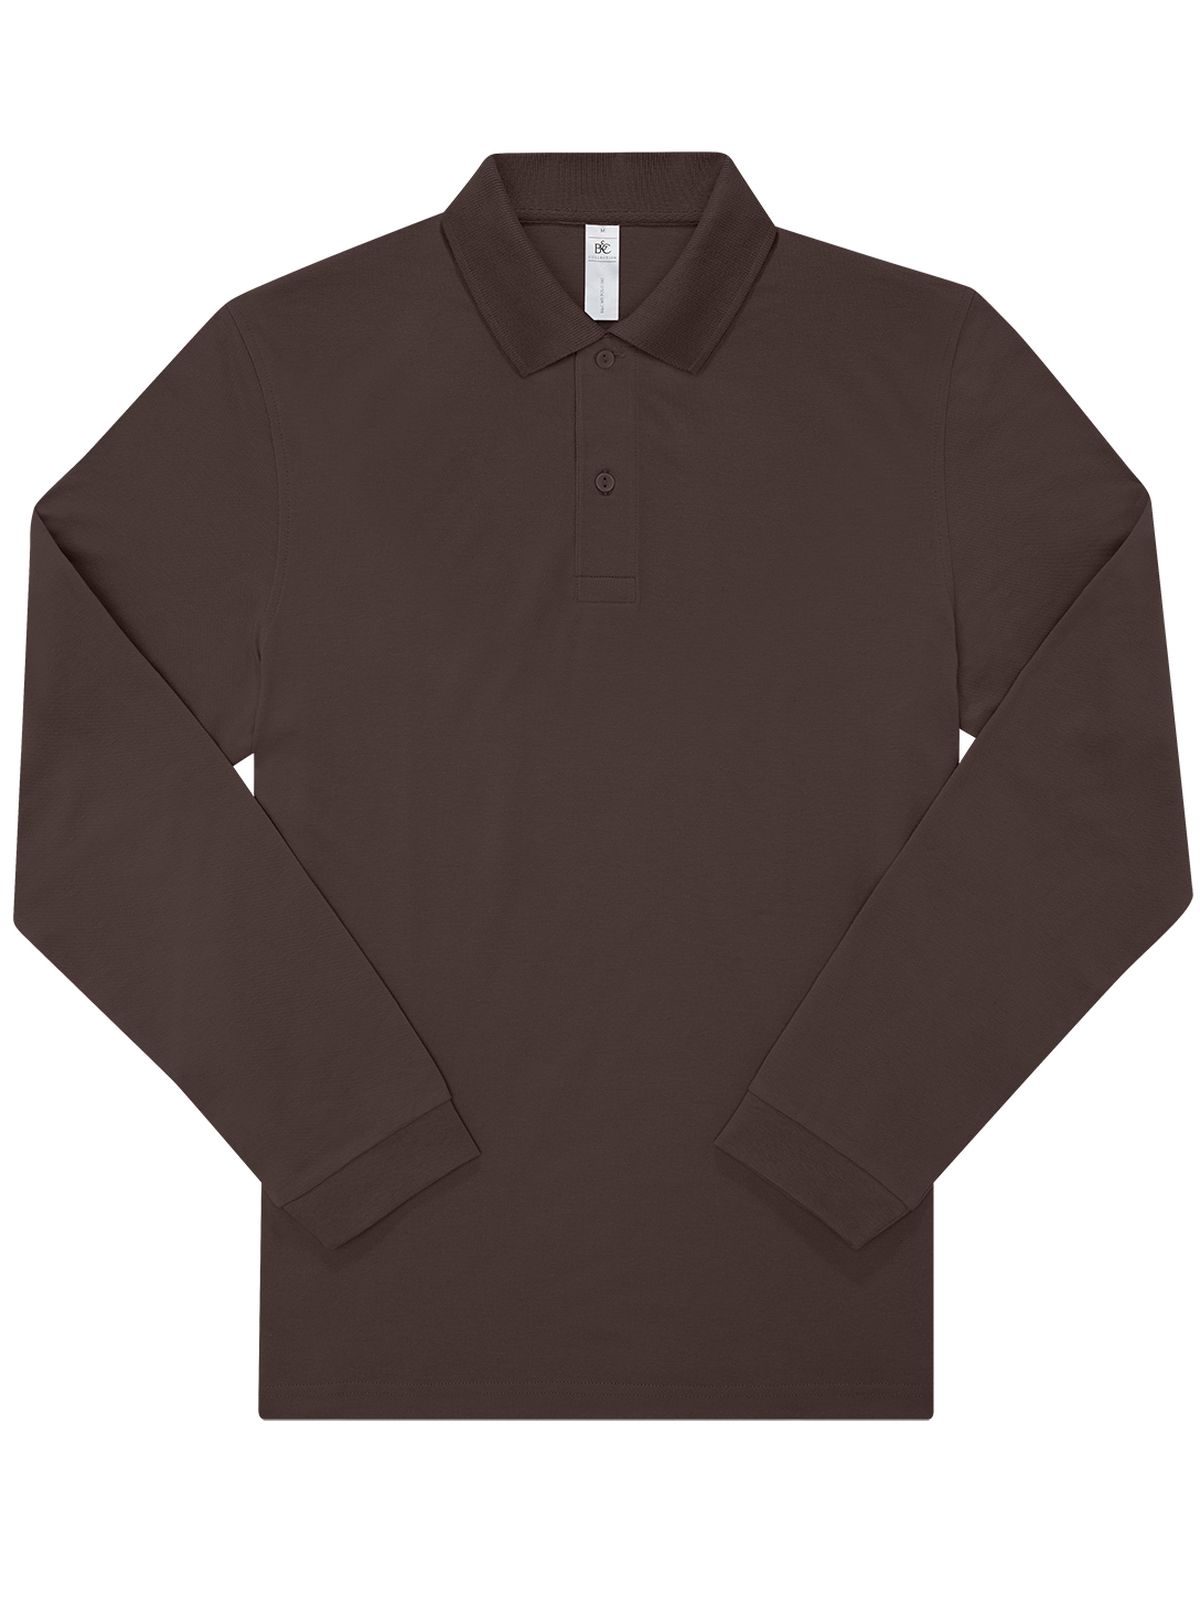 bc-my-polo-180-lsl-roasted-coffee.webp